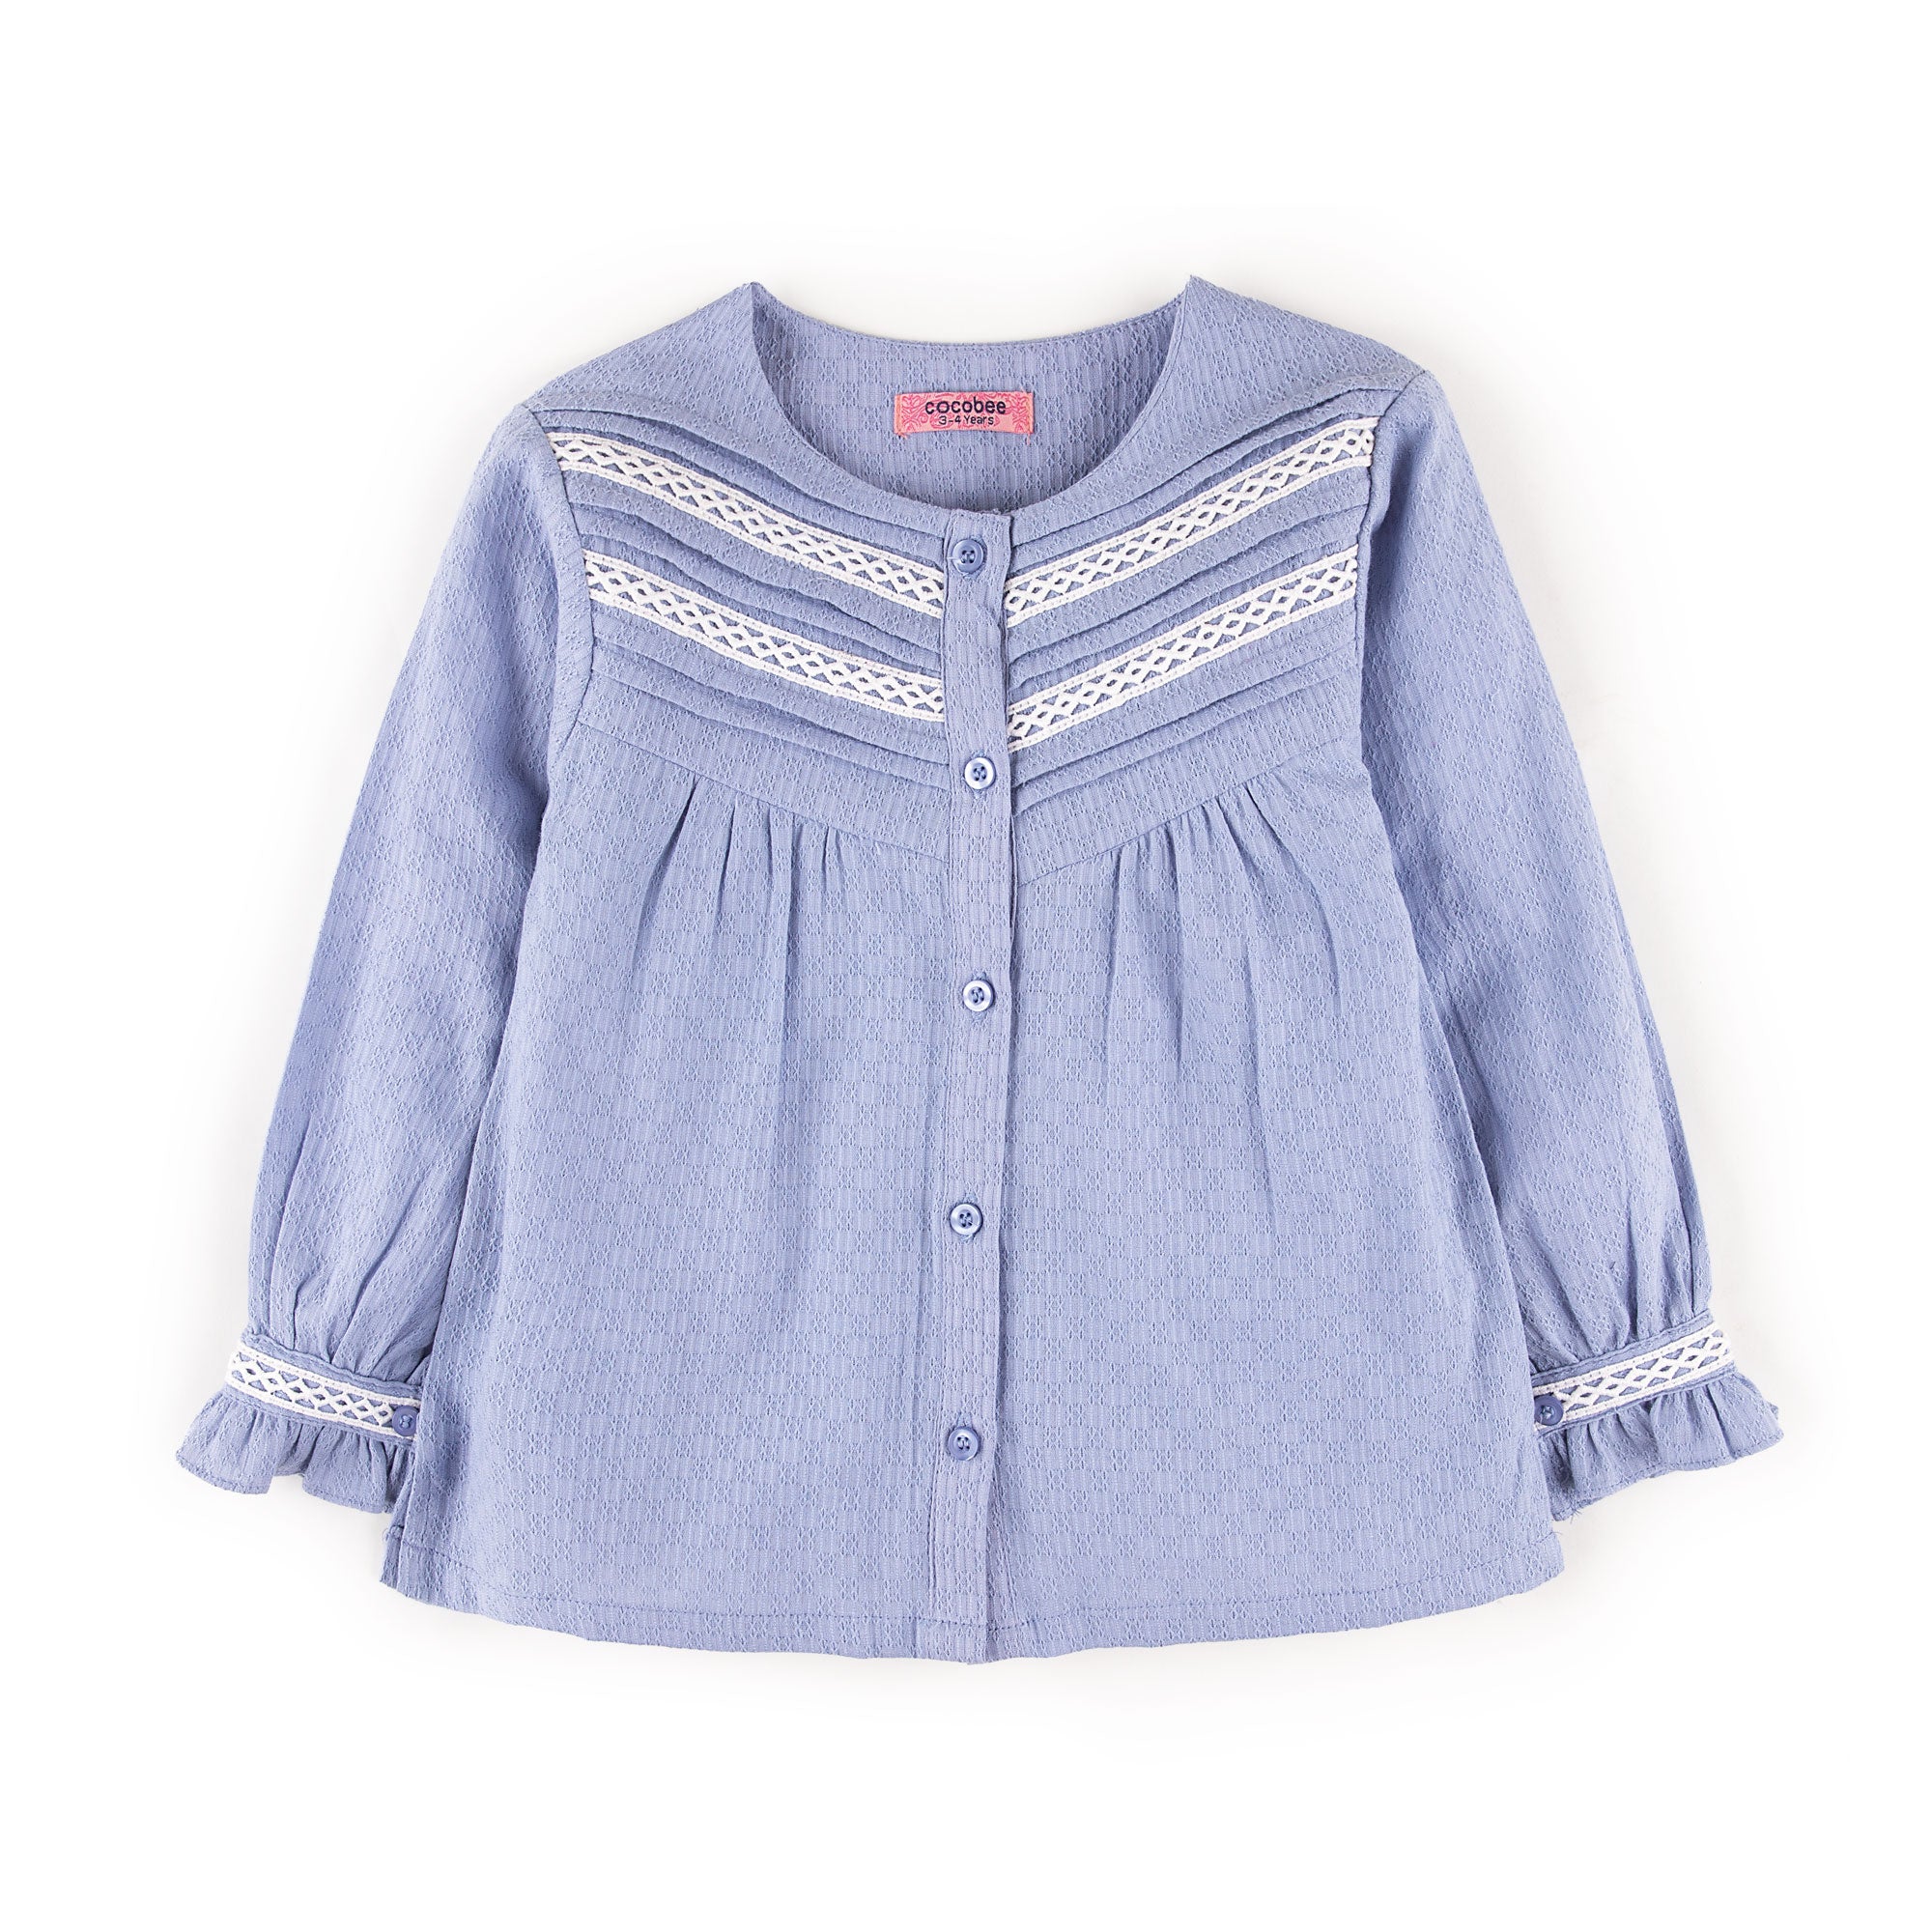 Dazzling Pleated Top For Girls